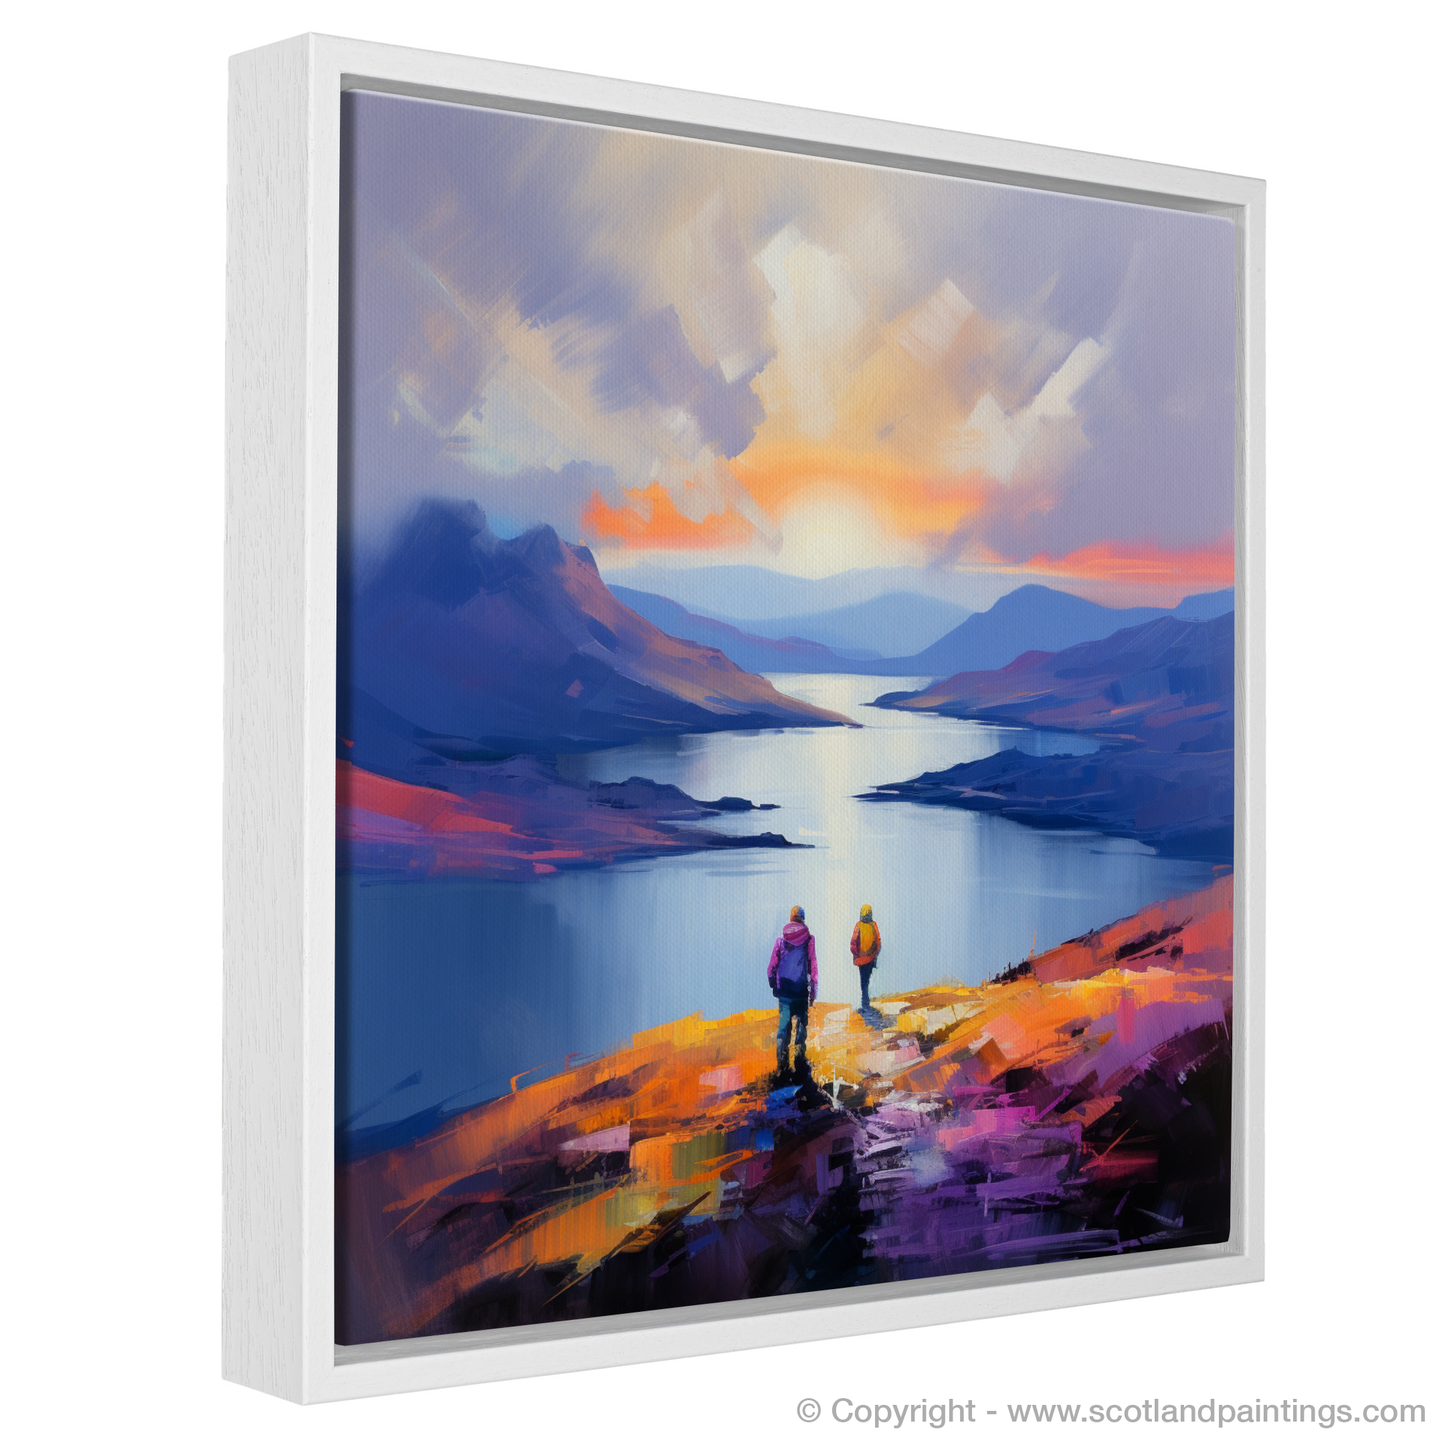 Painting and Art Print of Two hikers looking out on Loch Lomond entitled "Sunset Serenade at Loch Lomond".